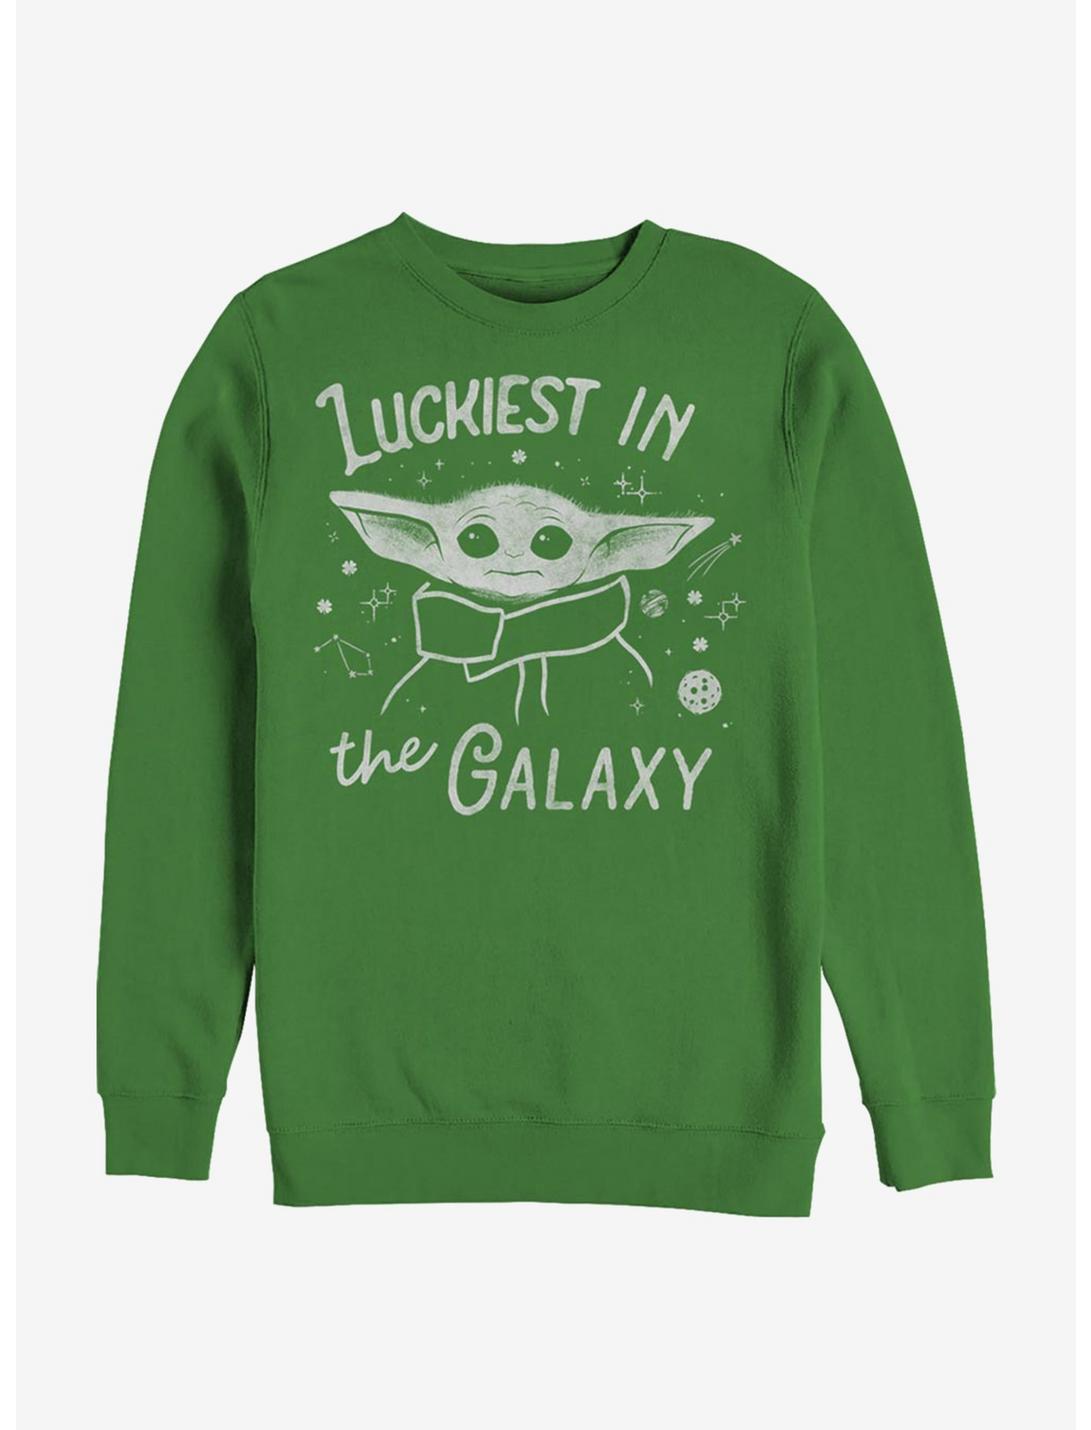 Star Wars The Mandalorian Luckiest In The Galaxy The Child Sweatshirt, KELLY, hi-res